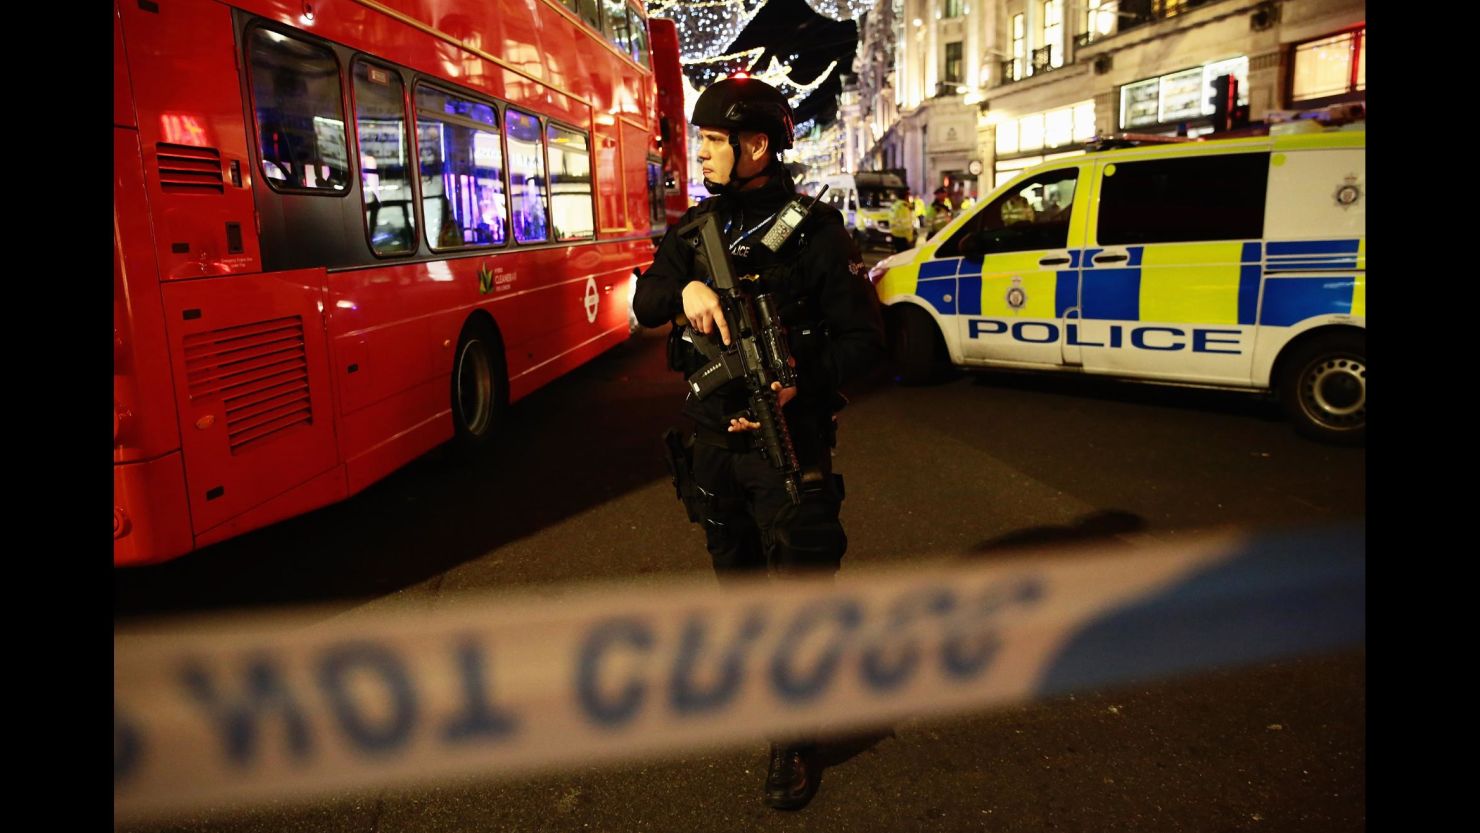 Armed police officers are seen near Oxford Circus underground station. Police were responding to reports of an incident.